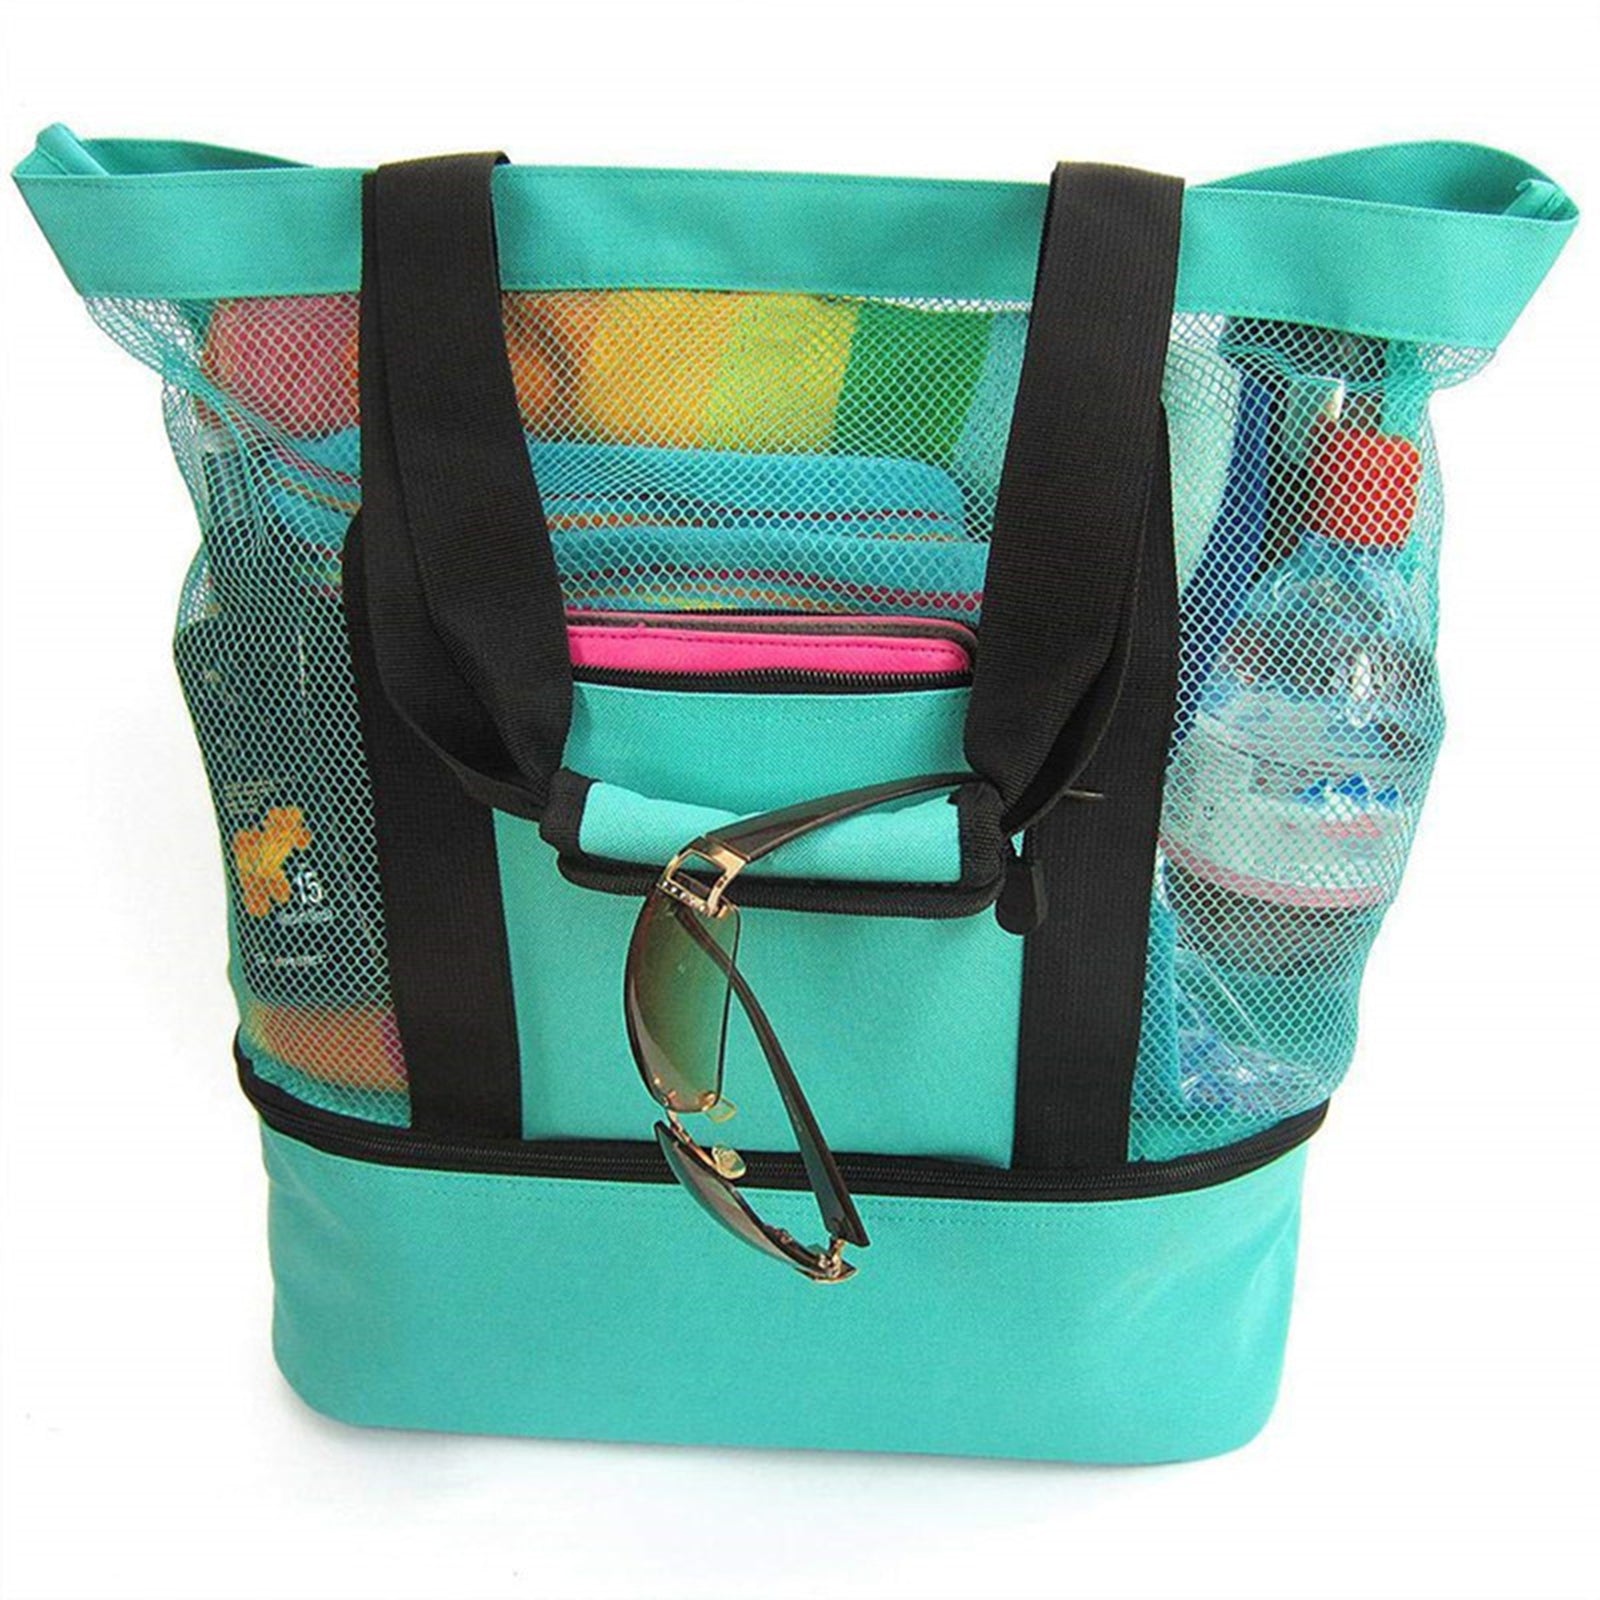 Large Capacity Double Layer Canvas Storage Bag - Totes -  Trend Goods